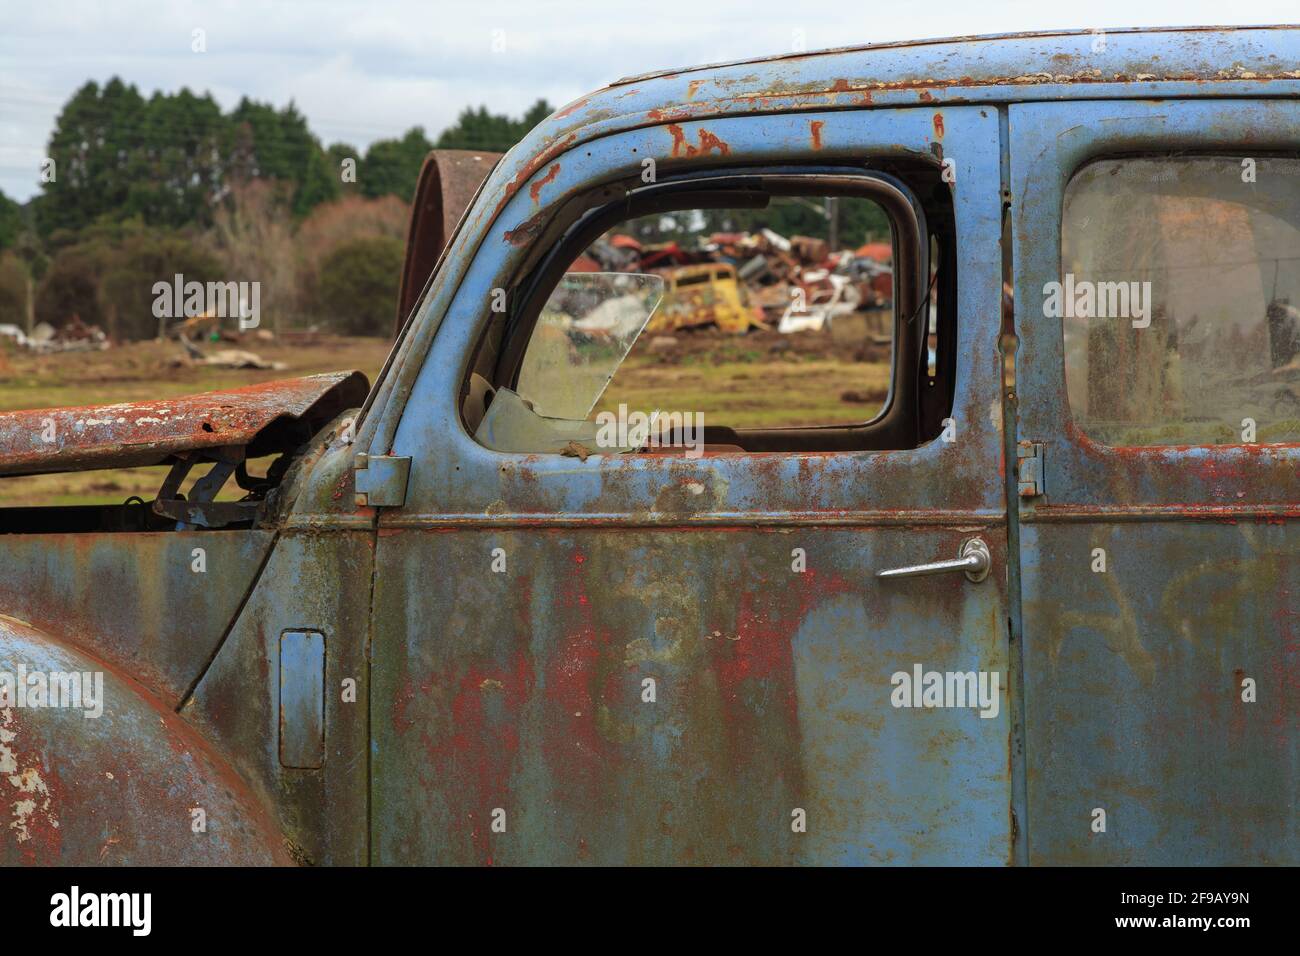 An old, rusted blue car in a wrecker's yard, with other scrapped vehicles visible through the car's broken windows Stock Photo